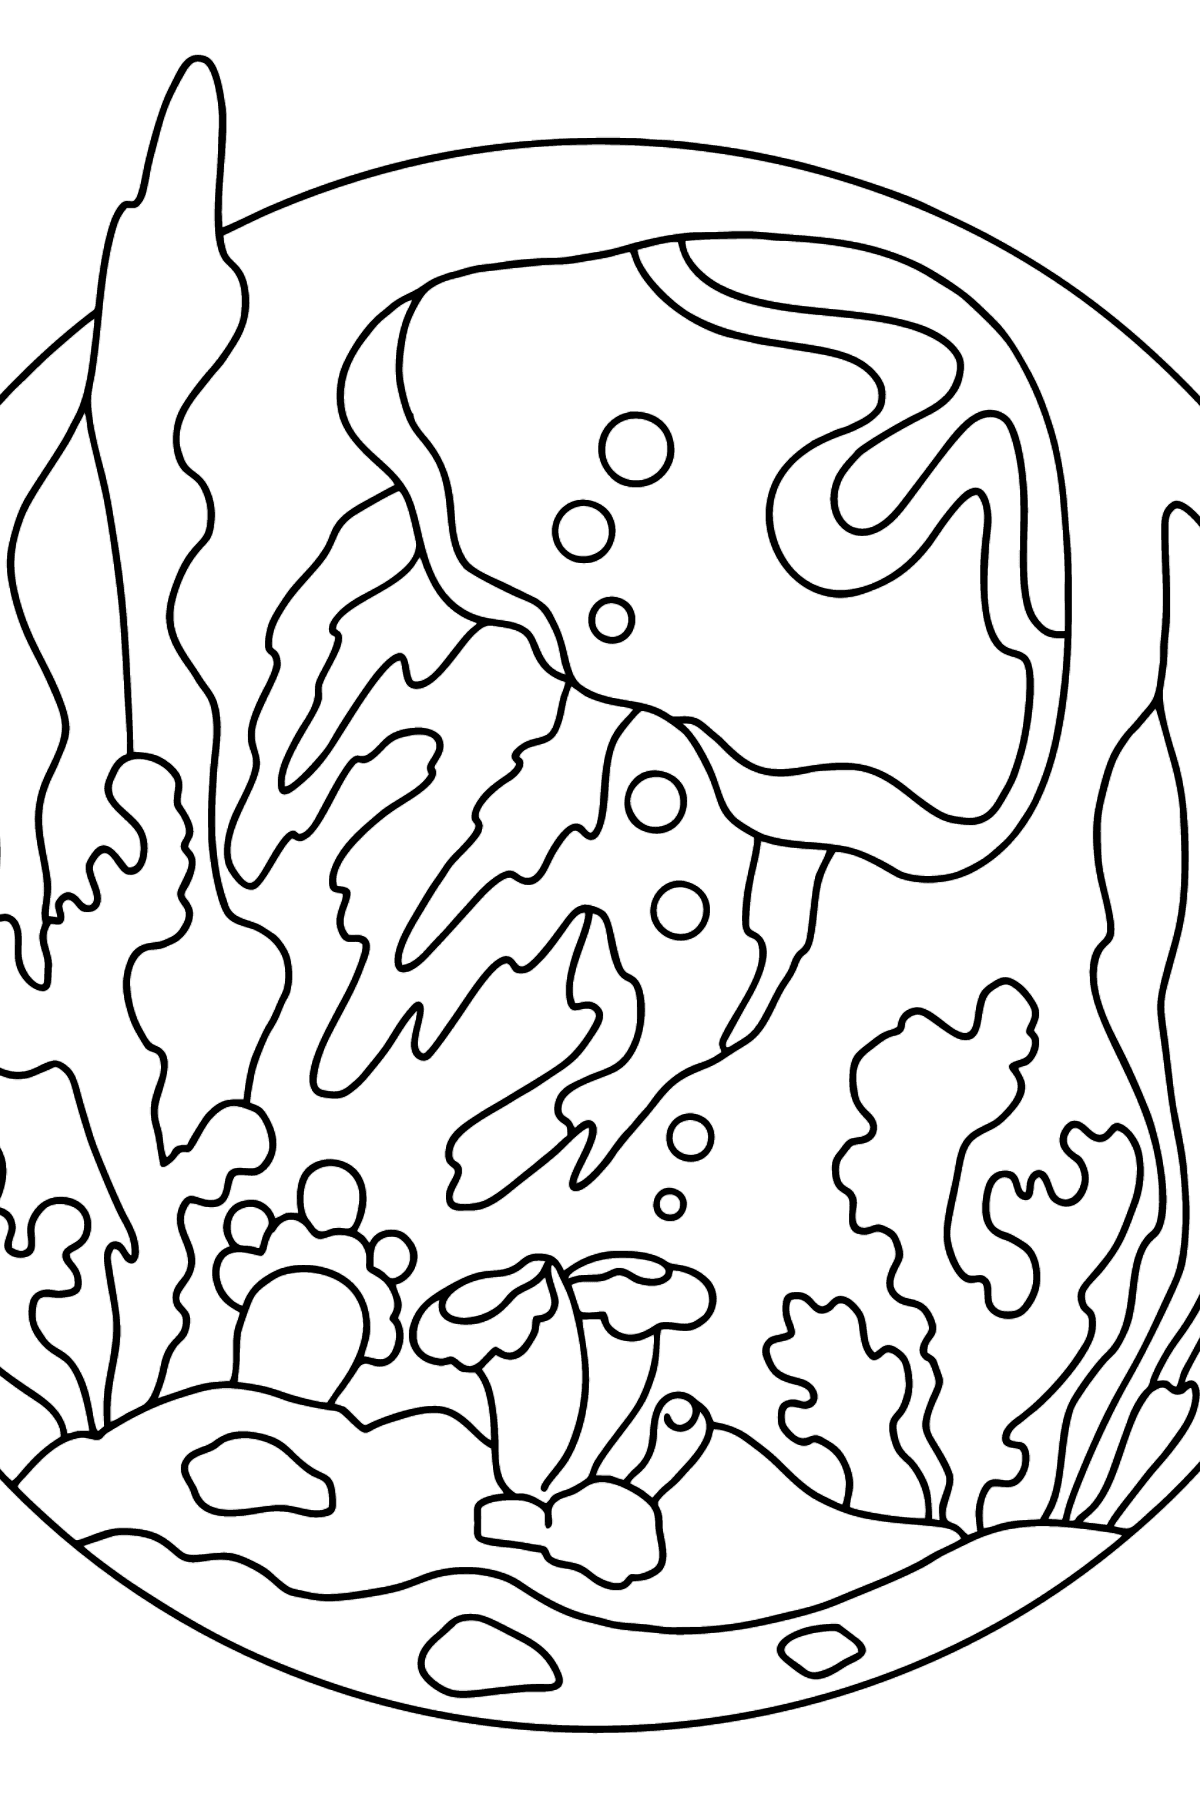 A Giant Jellyfish Coloring Page - Coloring Pages for Kids